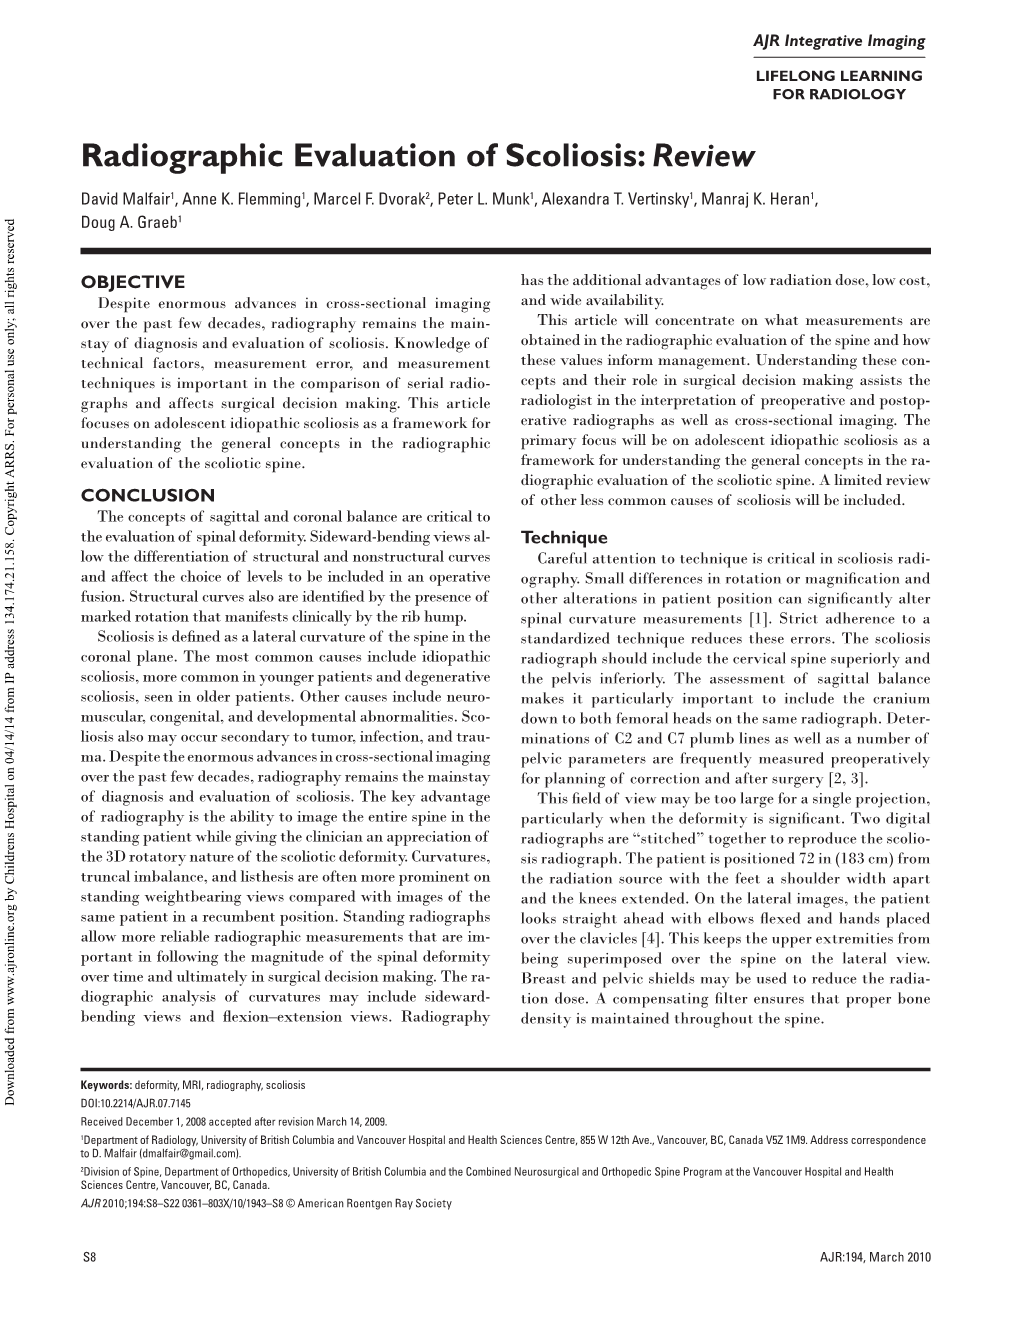 Radiographic Evaluation of Scoliosis: Review